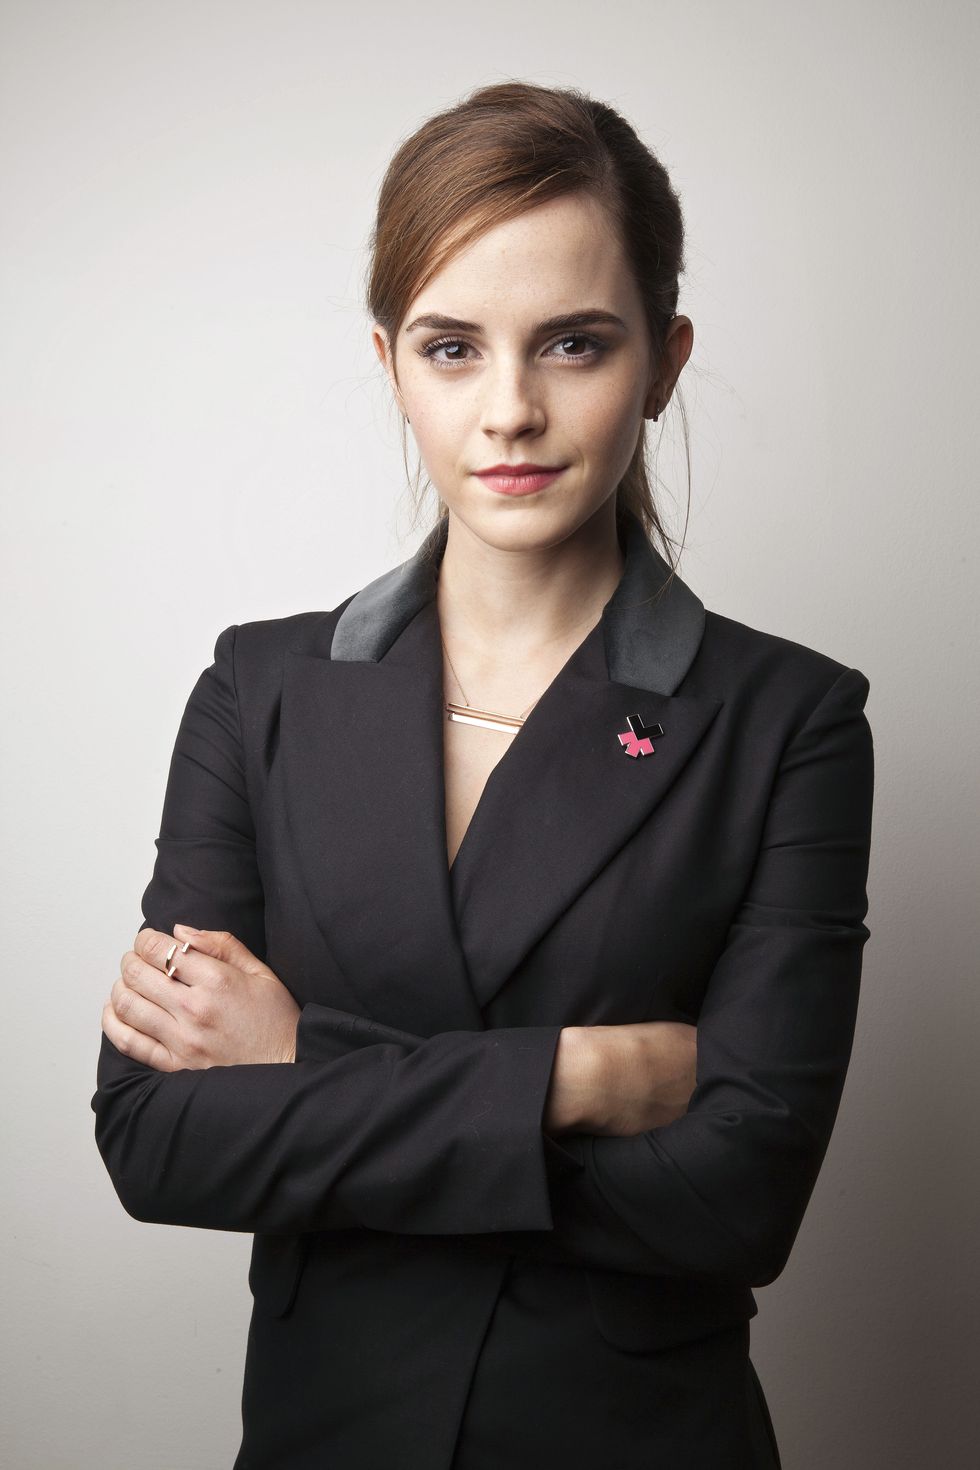 davos, 23 january 2015 – at the world economic forum in davos today, un women, the united nations entity dedicated to achieving gender equality and women’s empowerment unveiled the heforshe impact 10x10x10 pilot initiative to galvanize momentum in advancing gender equality and women’s empowerment the heforshe campaign’s impact 10x10x10 initiative is a one year pilot effort that aims to engage governments, corporations and universities as instruments of change positioned within some of the communities that most need to address deficiencies in women’s empowerment and gender equality and that have the greatest capacity to make and influence those changes each sector will identify approaches for addressing gender inequality, and pilot test the effectiveness of these interventions for scalabilitythe initiative was launched at a press conference attended by he president paul kagame of rwanda he prime minister stefan löfven of sweden un secretary general ban ki moon, un under secretary general and executive director of un women phumzile mlambo ngcuka un women global goodwill ambassador, emma watson and paul polman, ceo and chairman of unilever